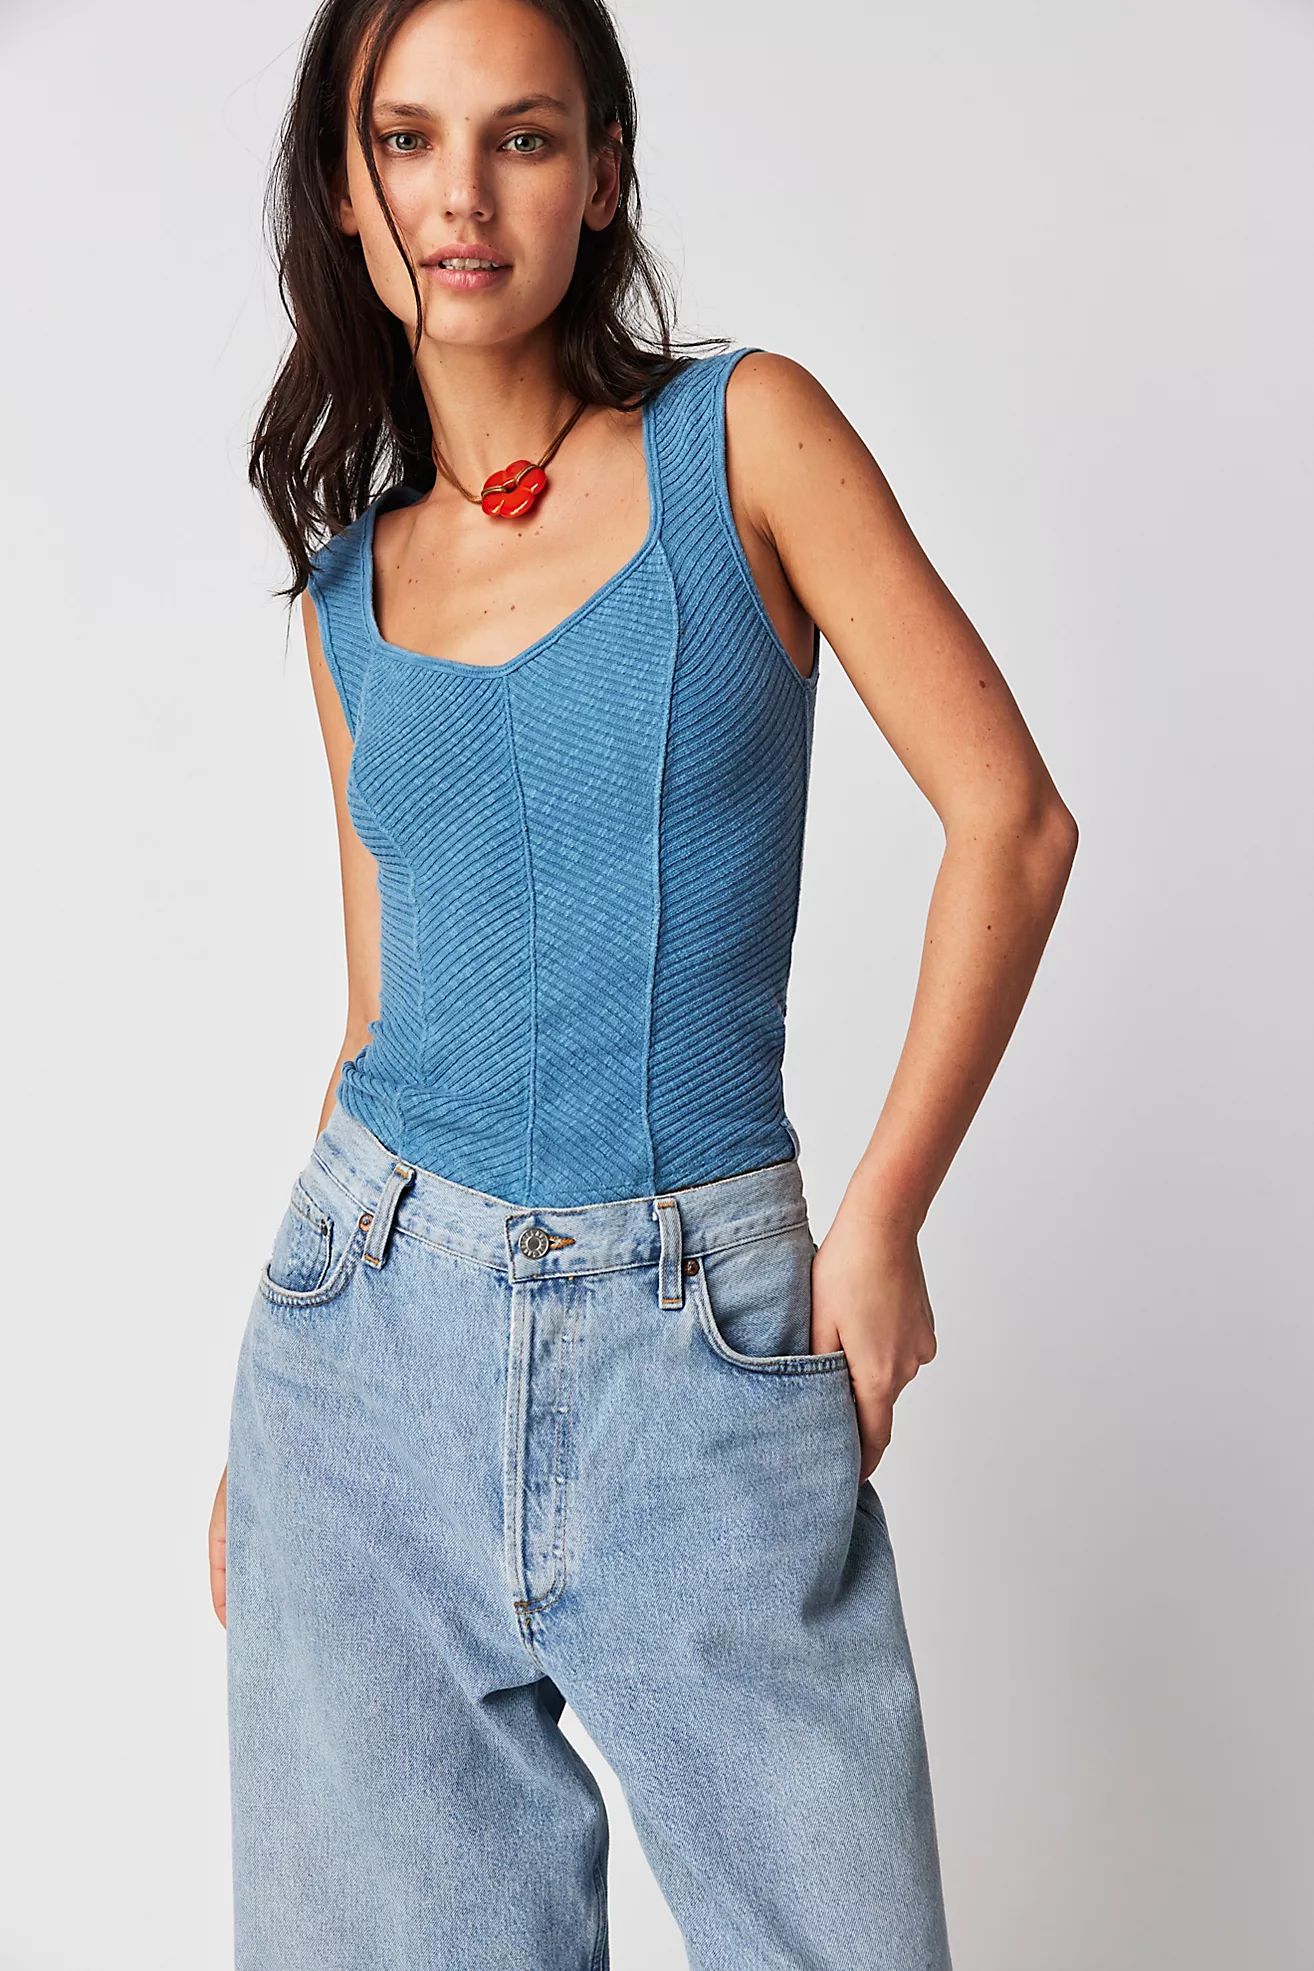 Boss Babe Tank | Free People (Global - UK&FR Excluded)